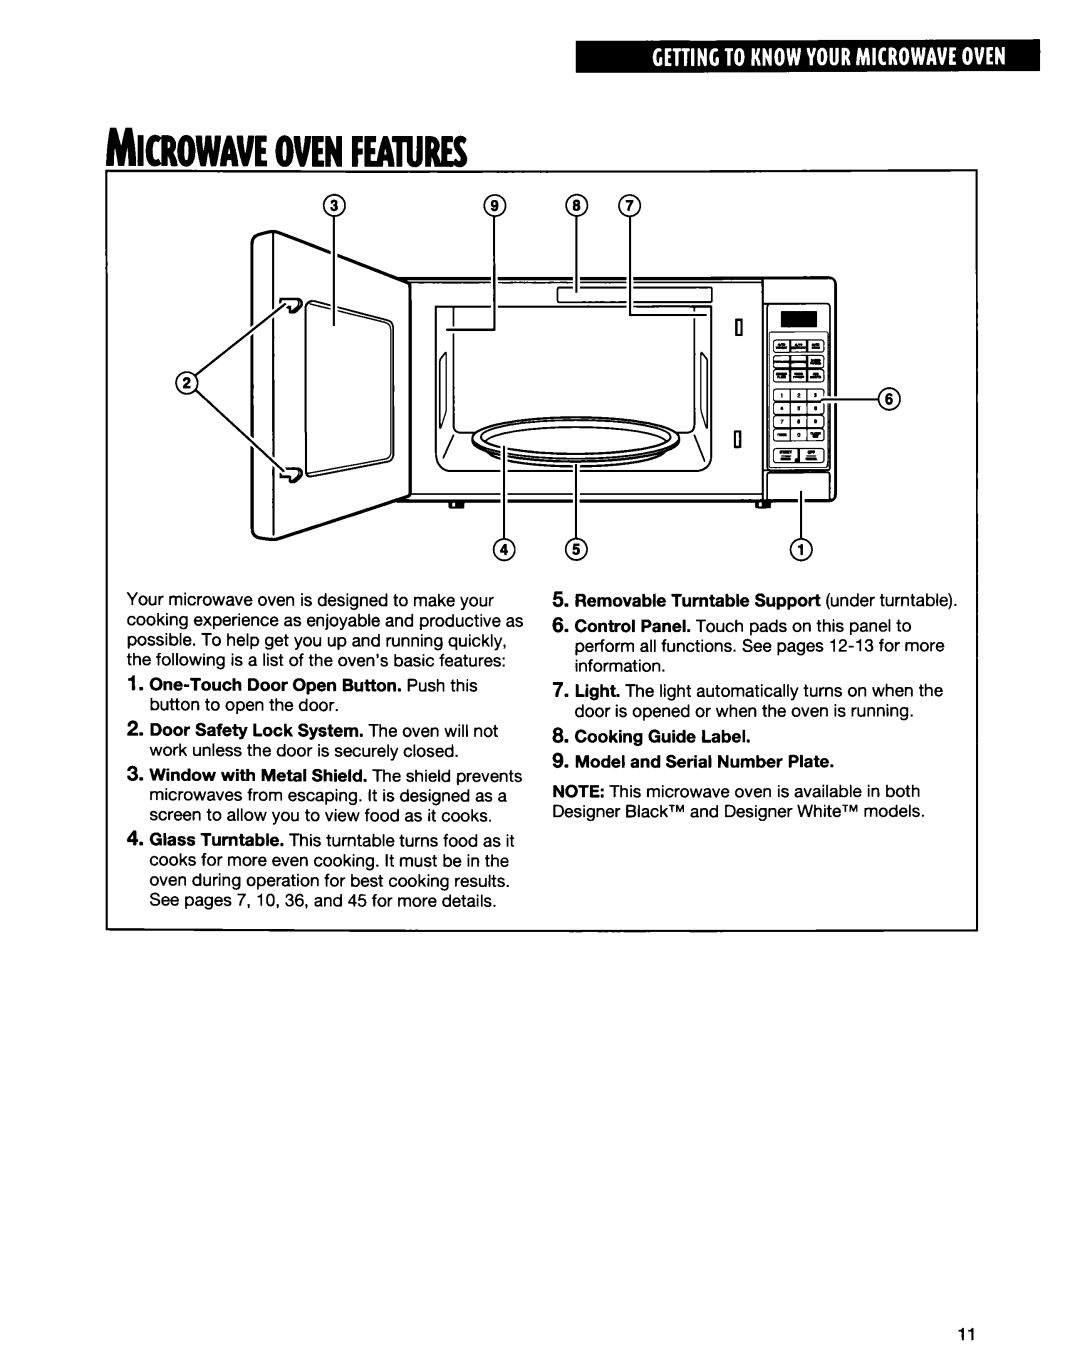 Whirlpool MT6120XE, MT9160XE installation instructions H~~~I~Waveovenfeatures 